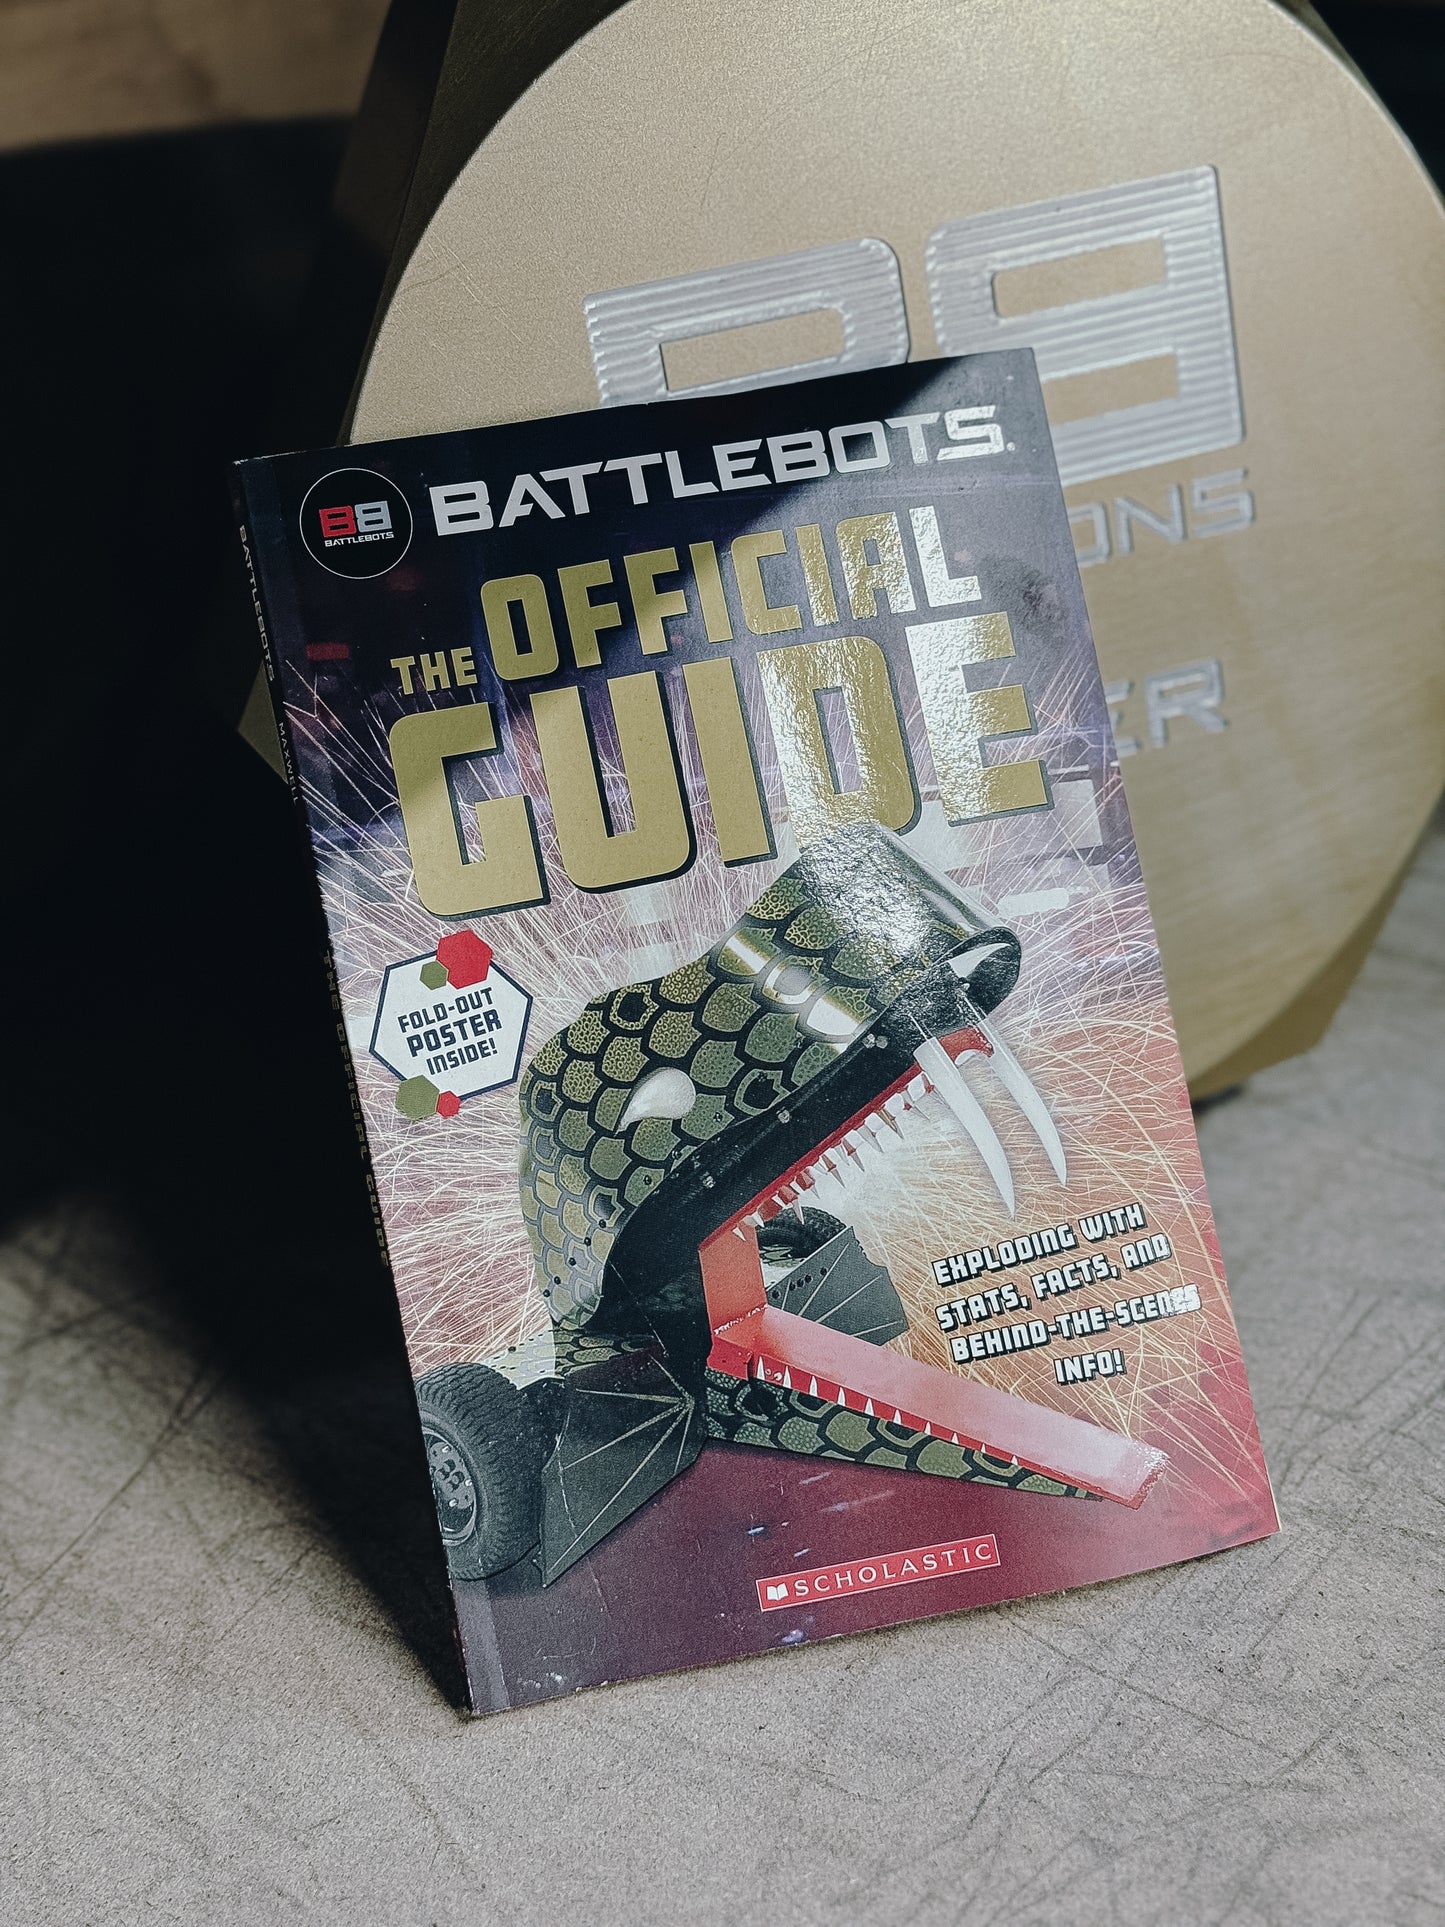 BattleBots Official Guide (Signed by End Game)